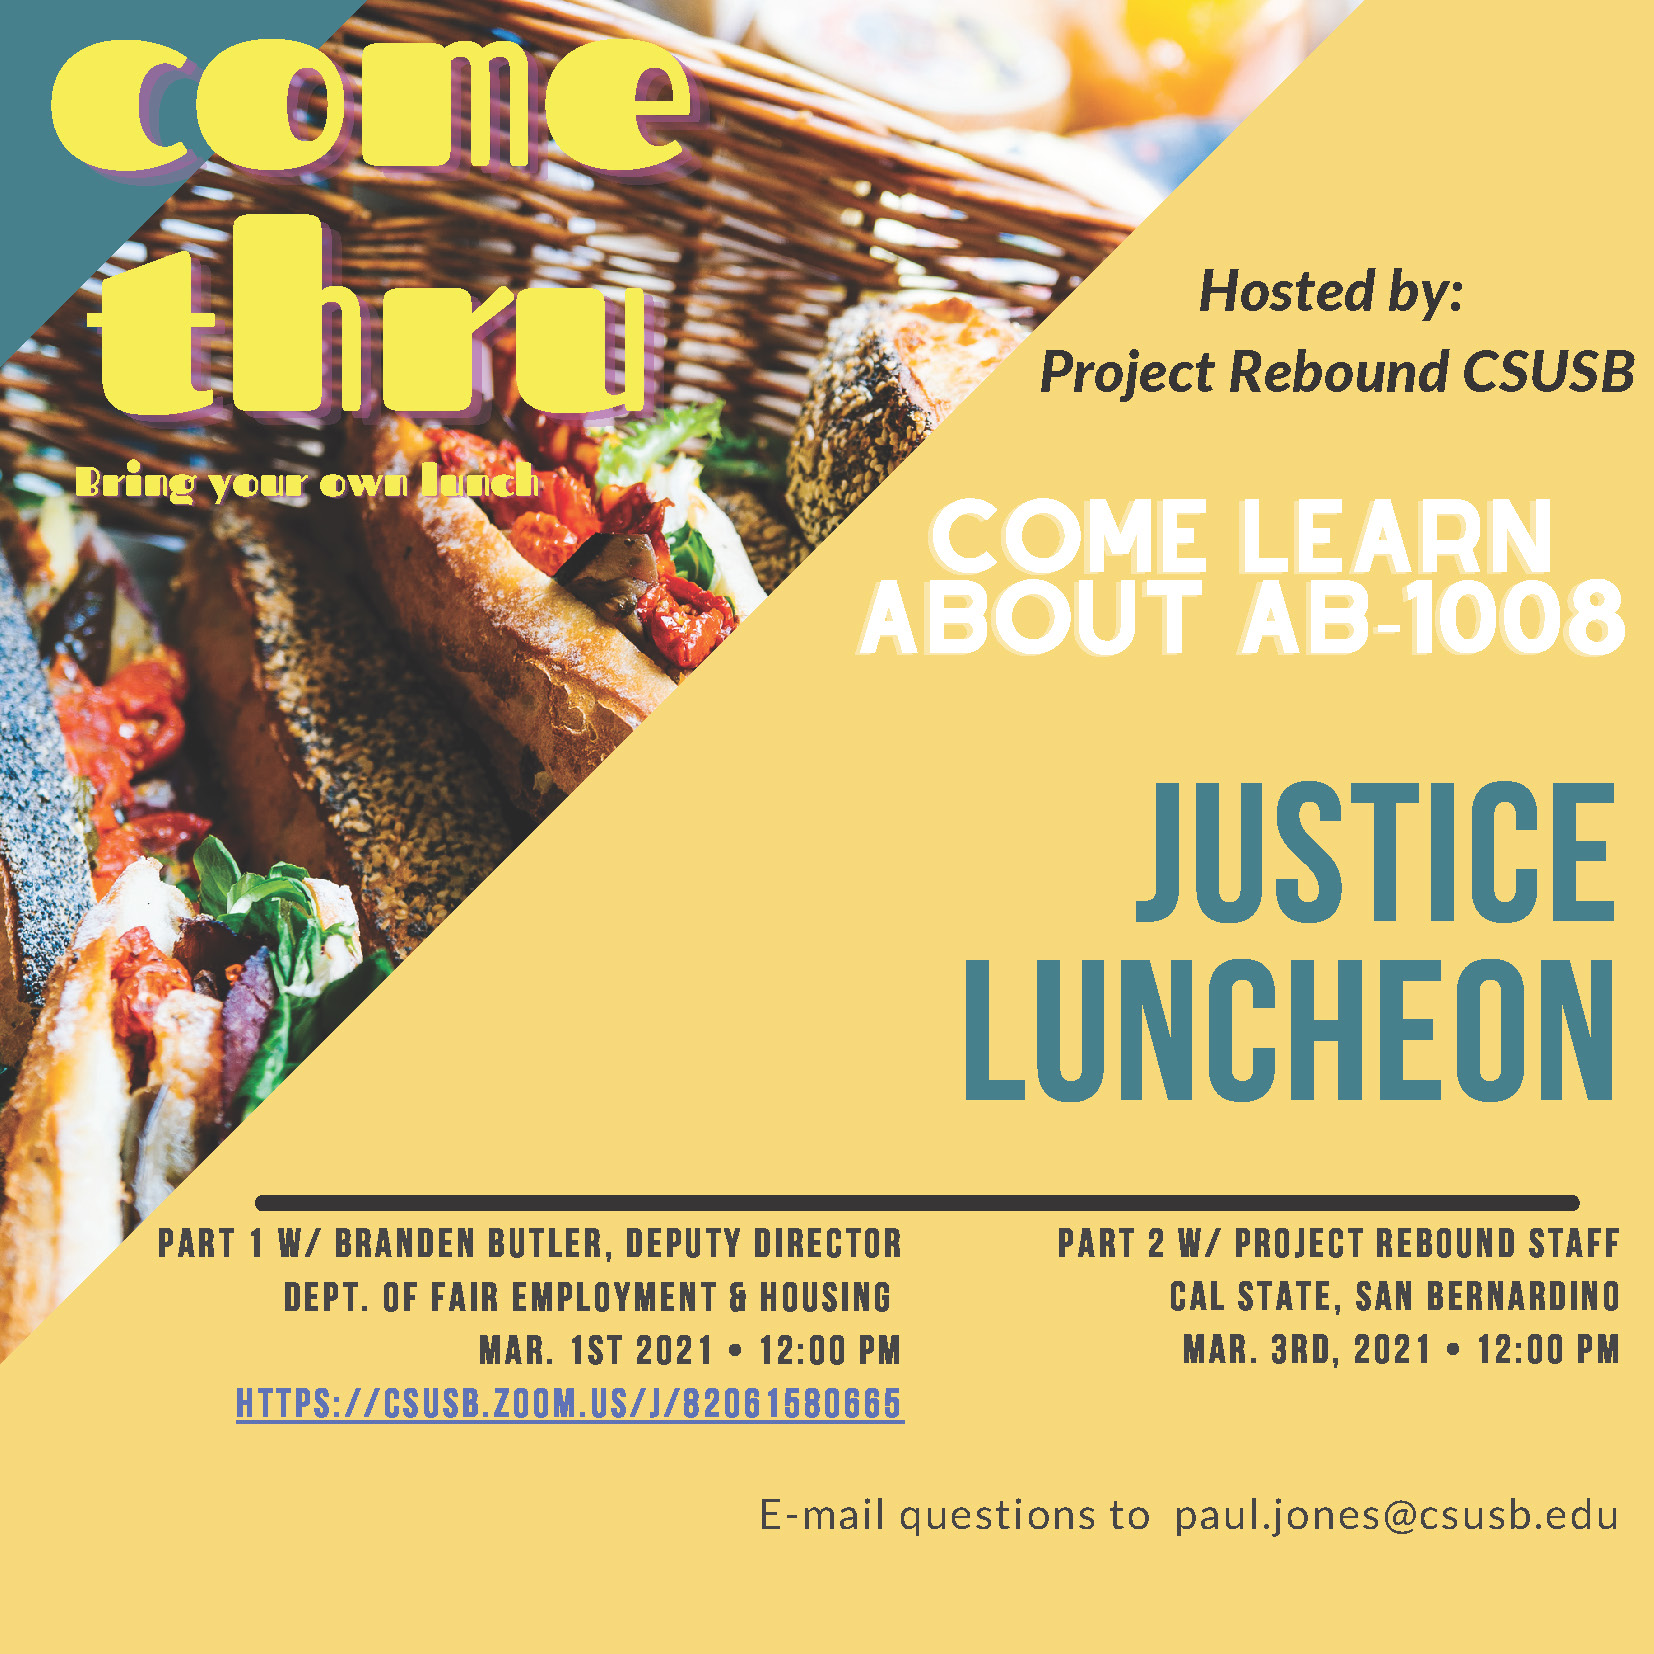 Virtual Justice Luncheons are set to be presented on Monday, March 1, with Brandon Butler, deputy director of Fair Employment and Housing, and Wednesday, March 3, with Project Rebound staff. Both will take place at noon.